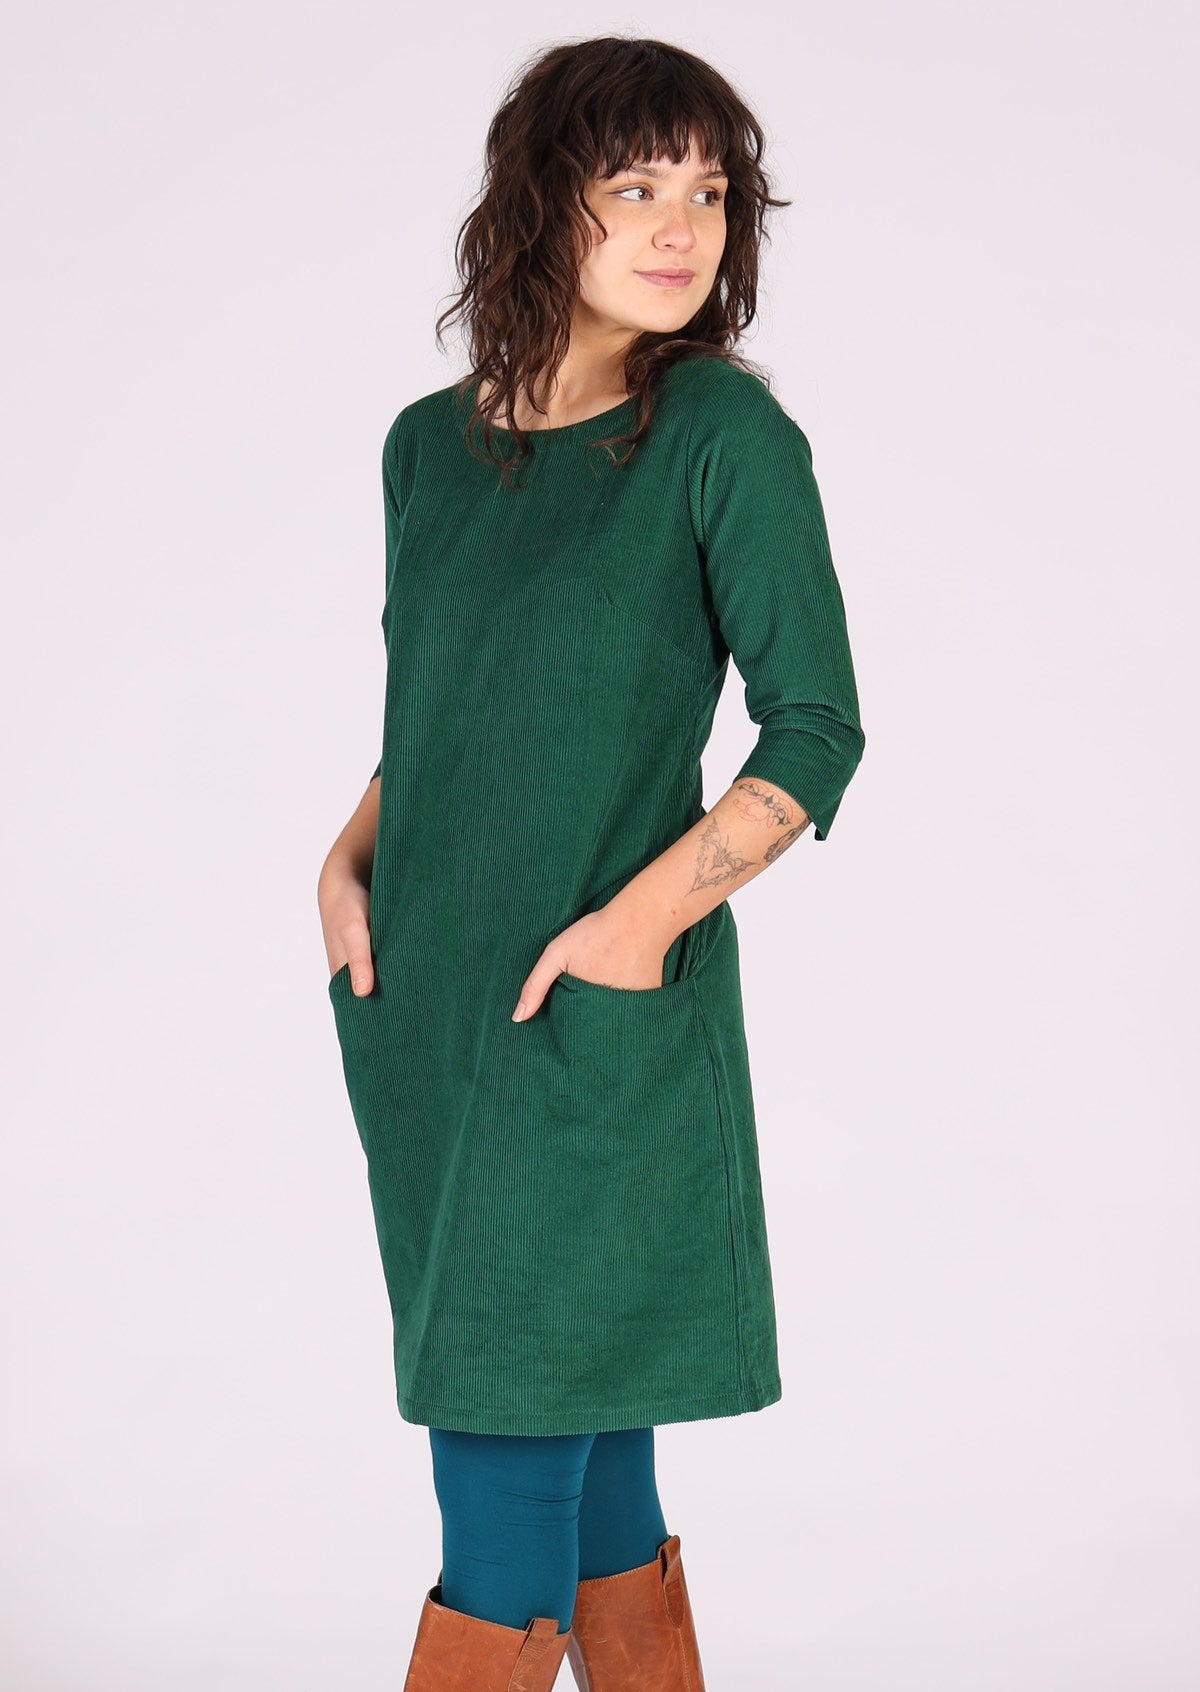 Cotton corduroy dress with 3/4 sleeves with detailed cuff